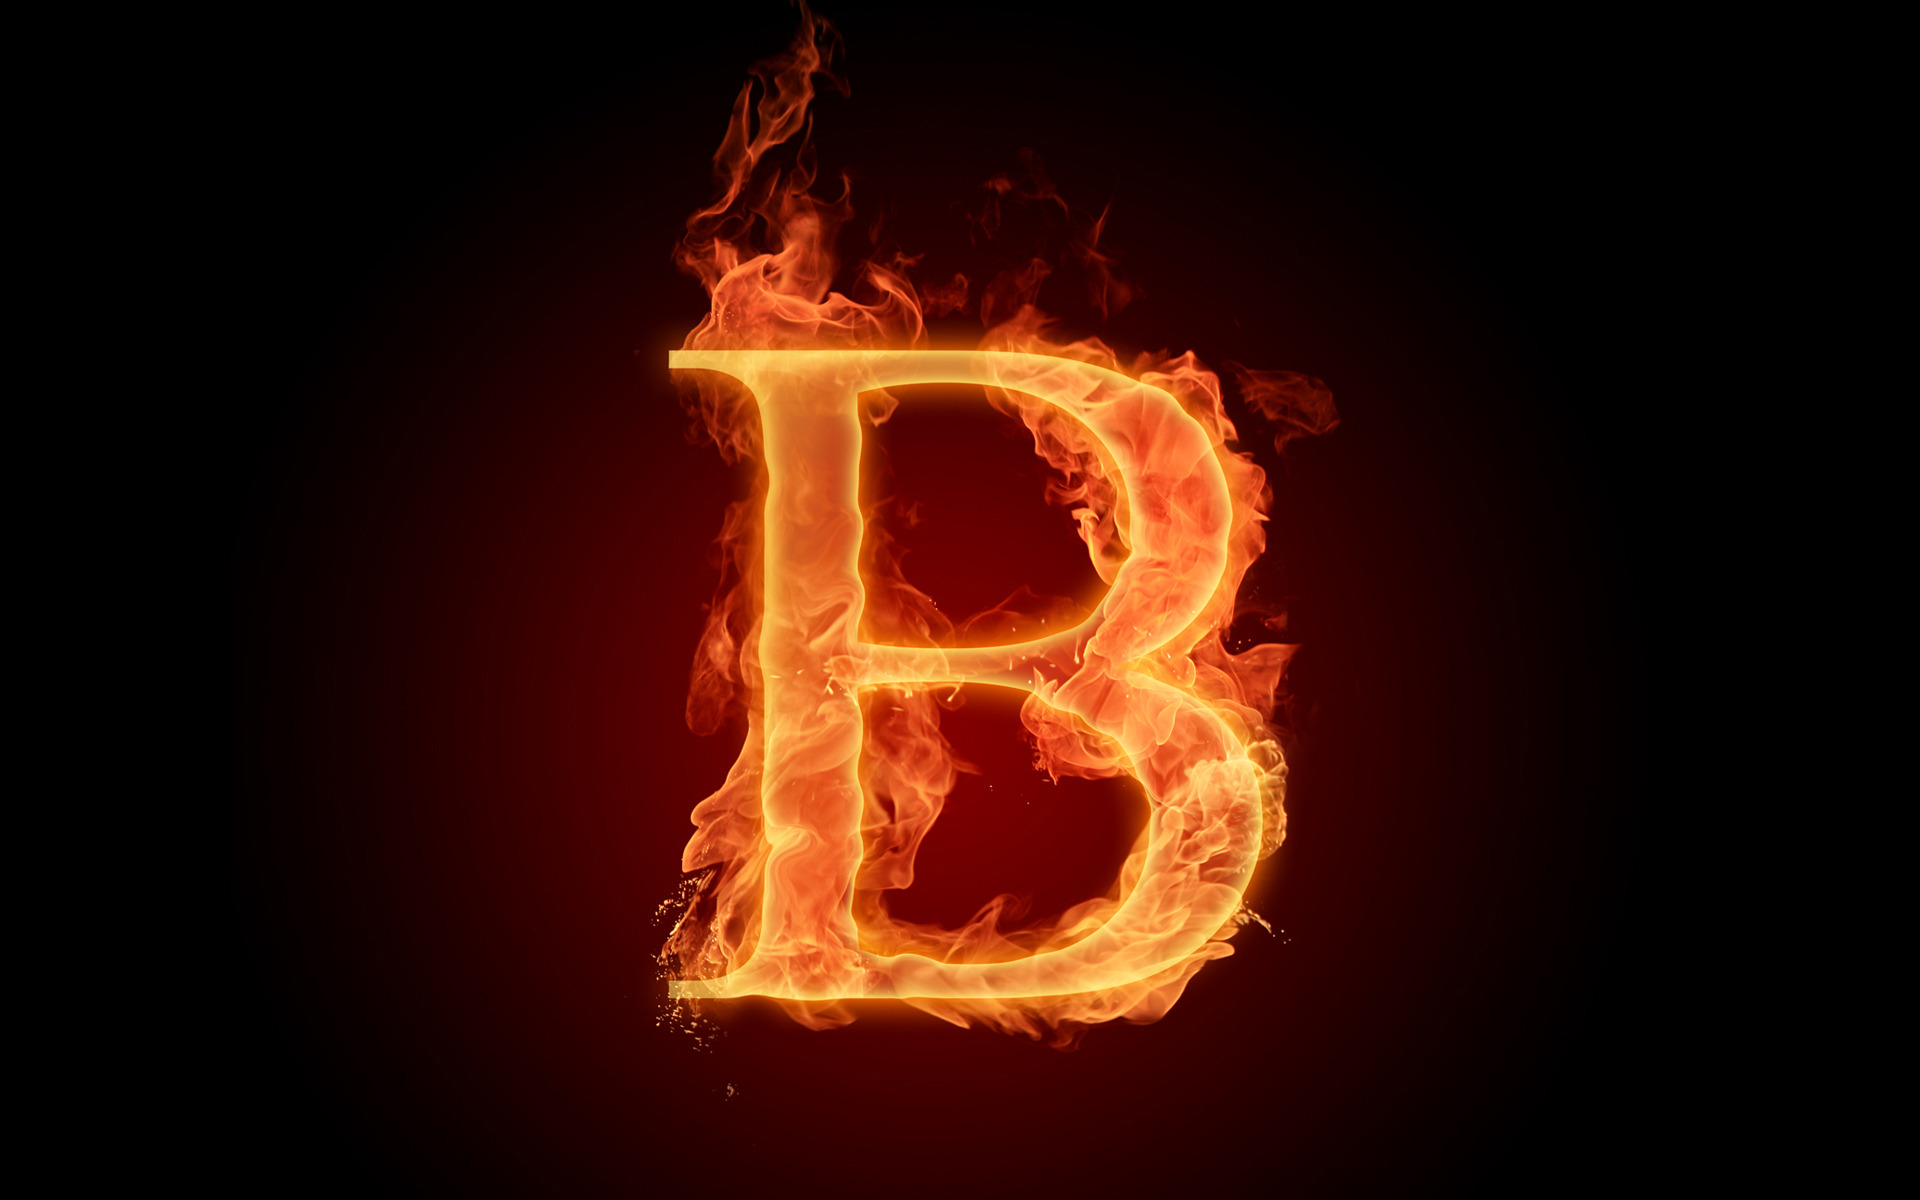 The fiery English alphabet picture B Wallpapers   HD Wallpapers 73616